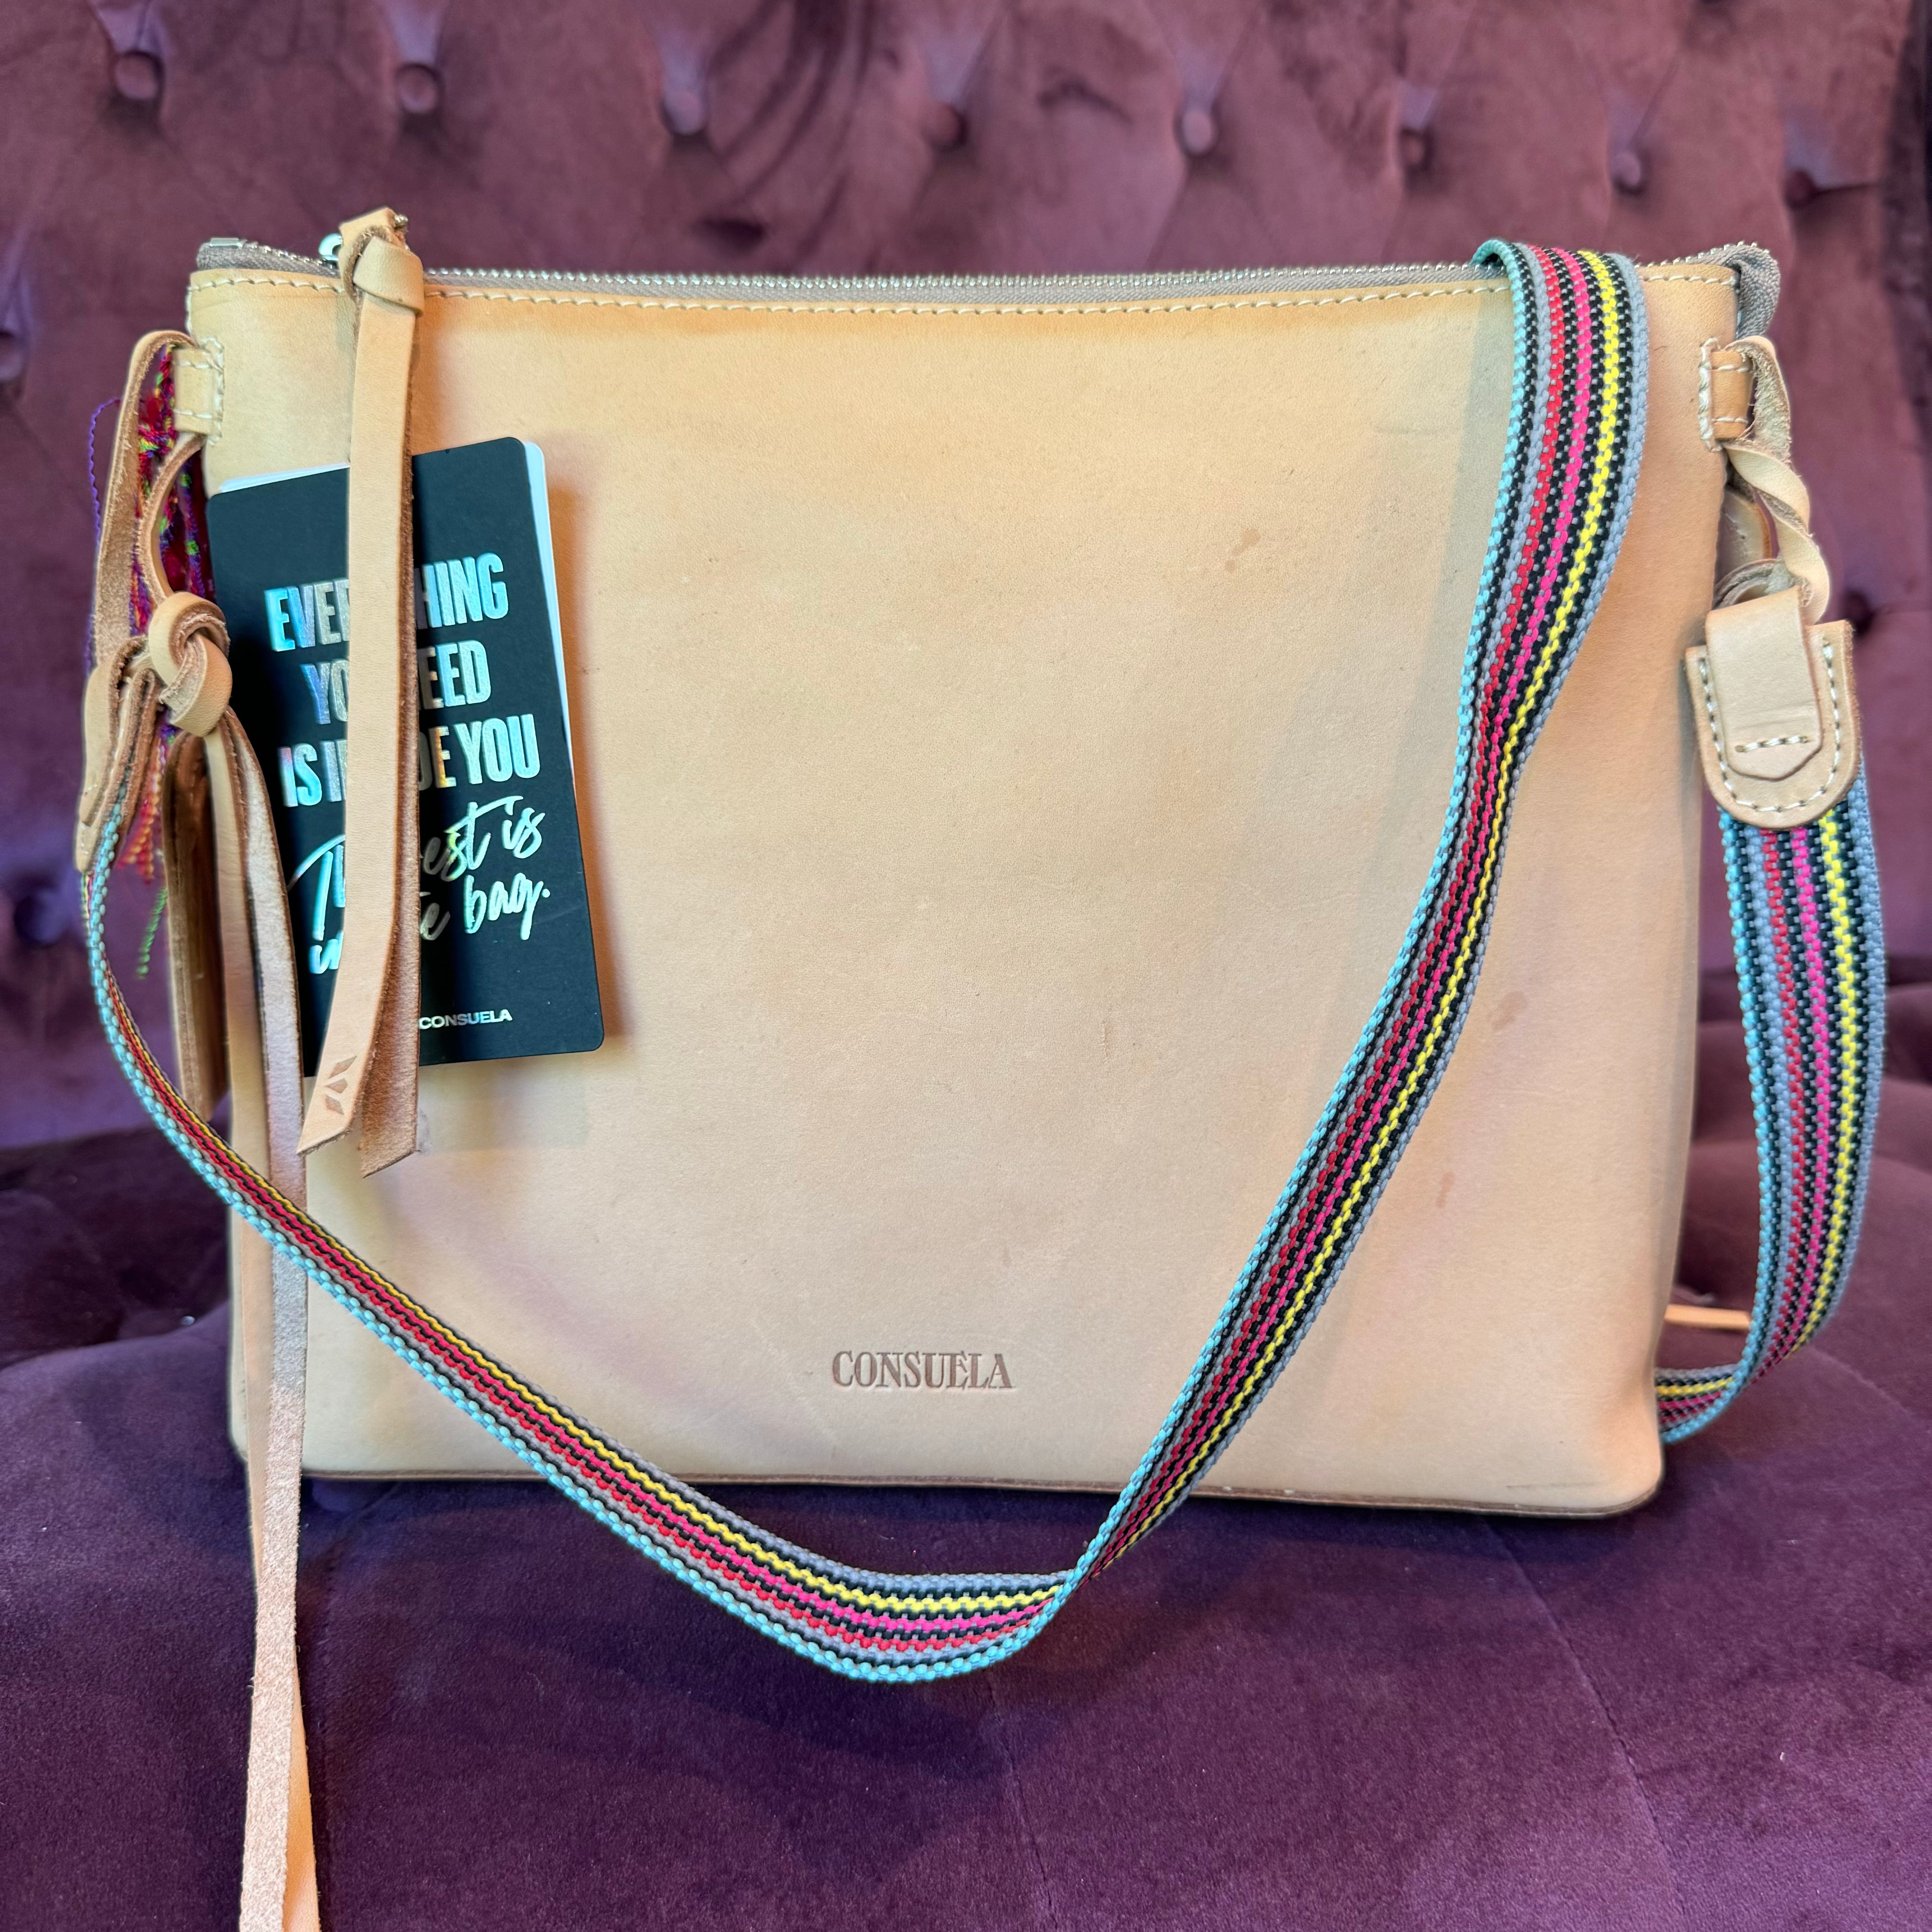 Blemished Consuela #1450| Diego Downtown Crossbody Bag - Giddy Up Glamour Boutique